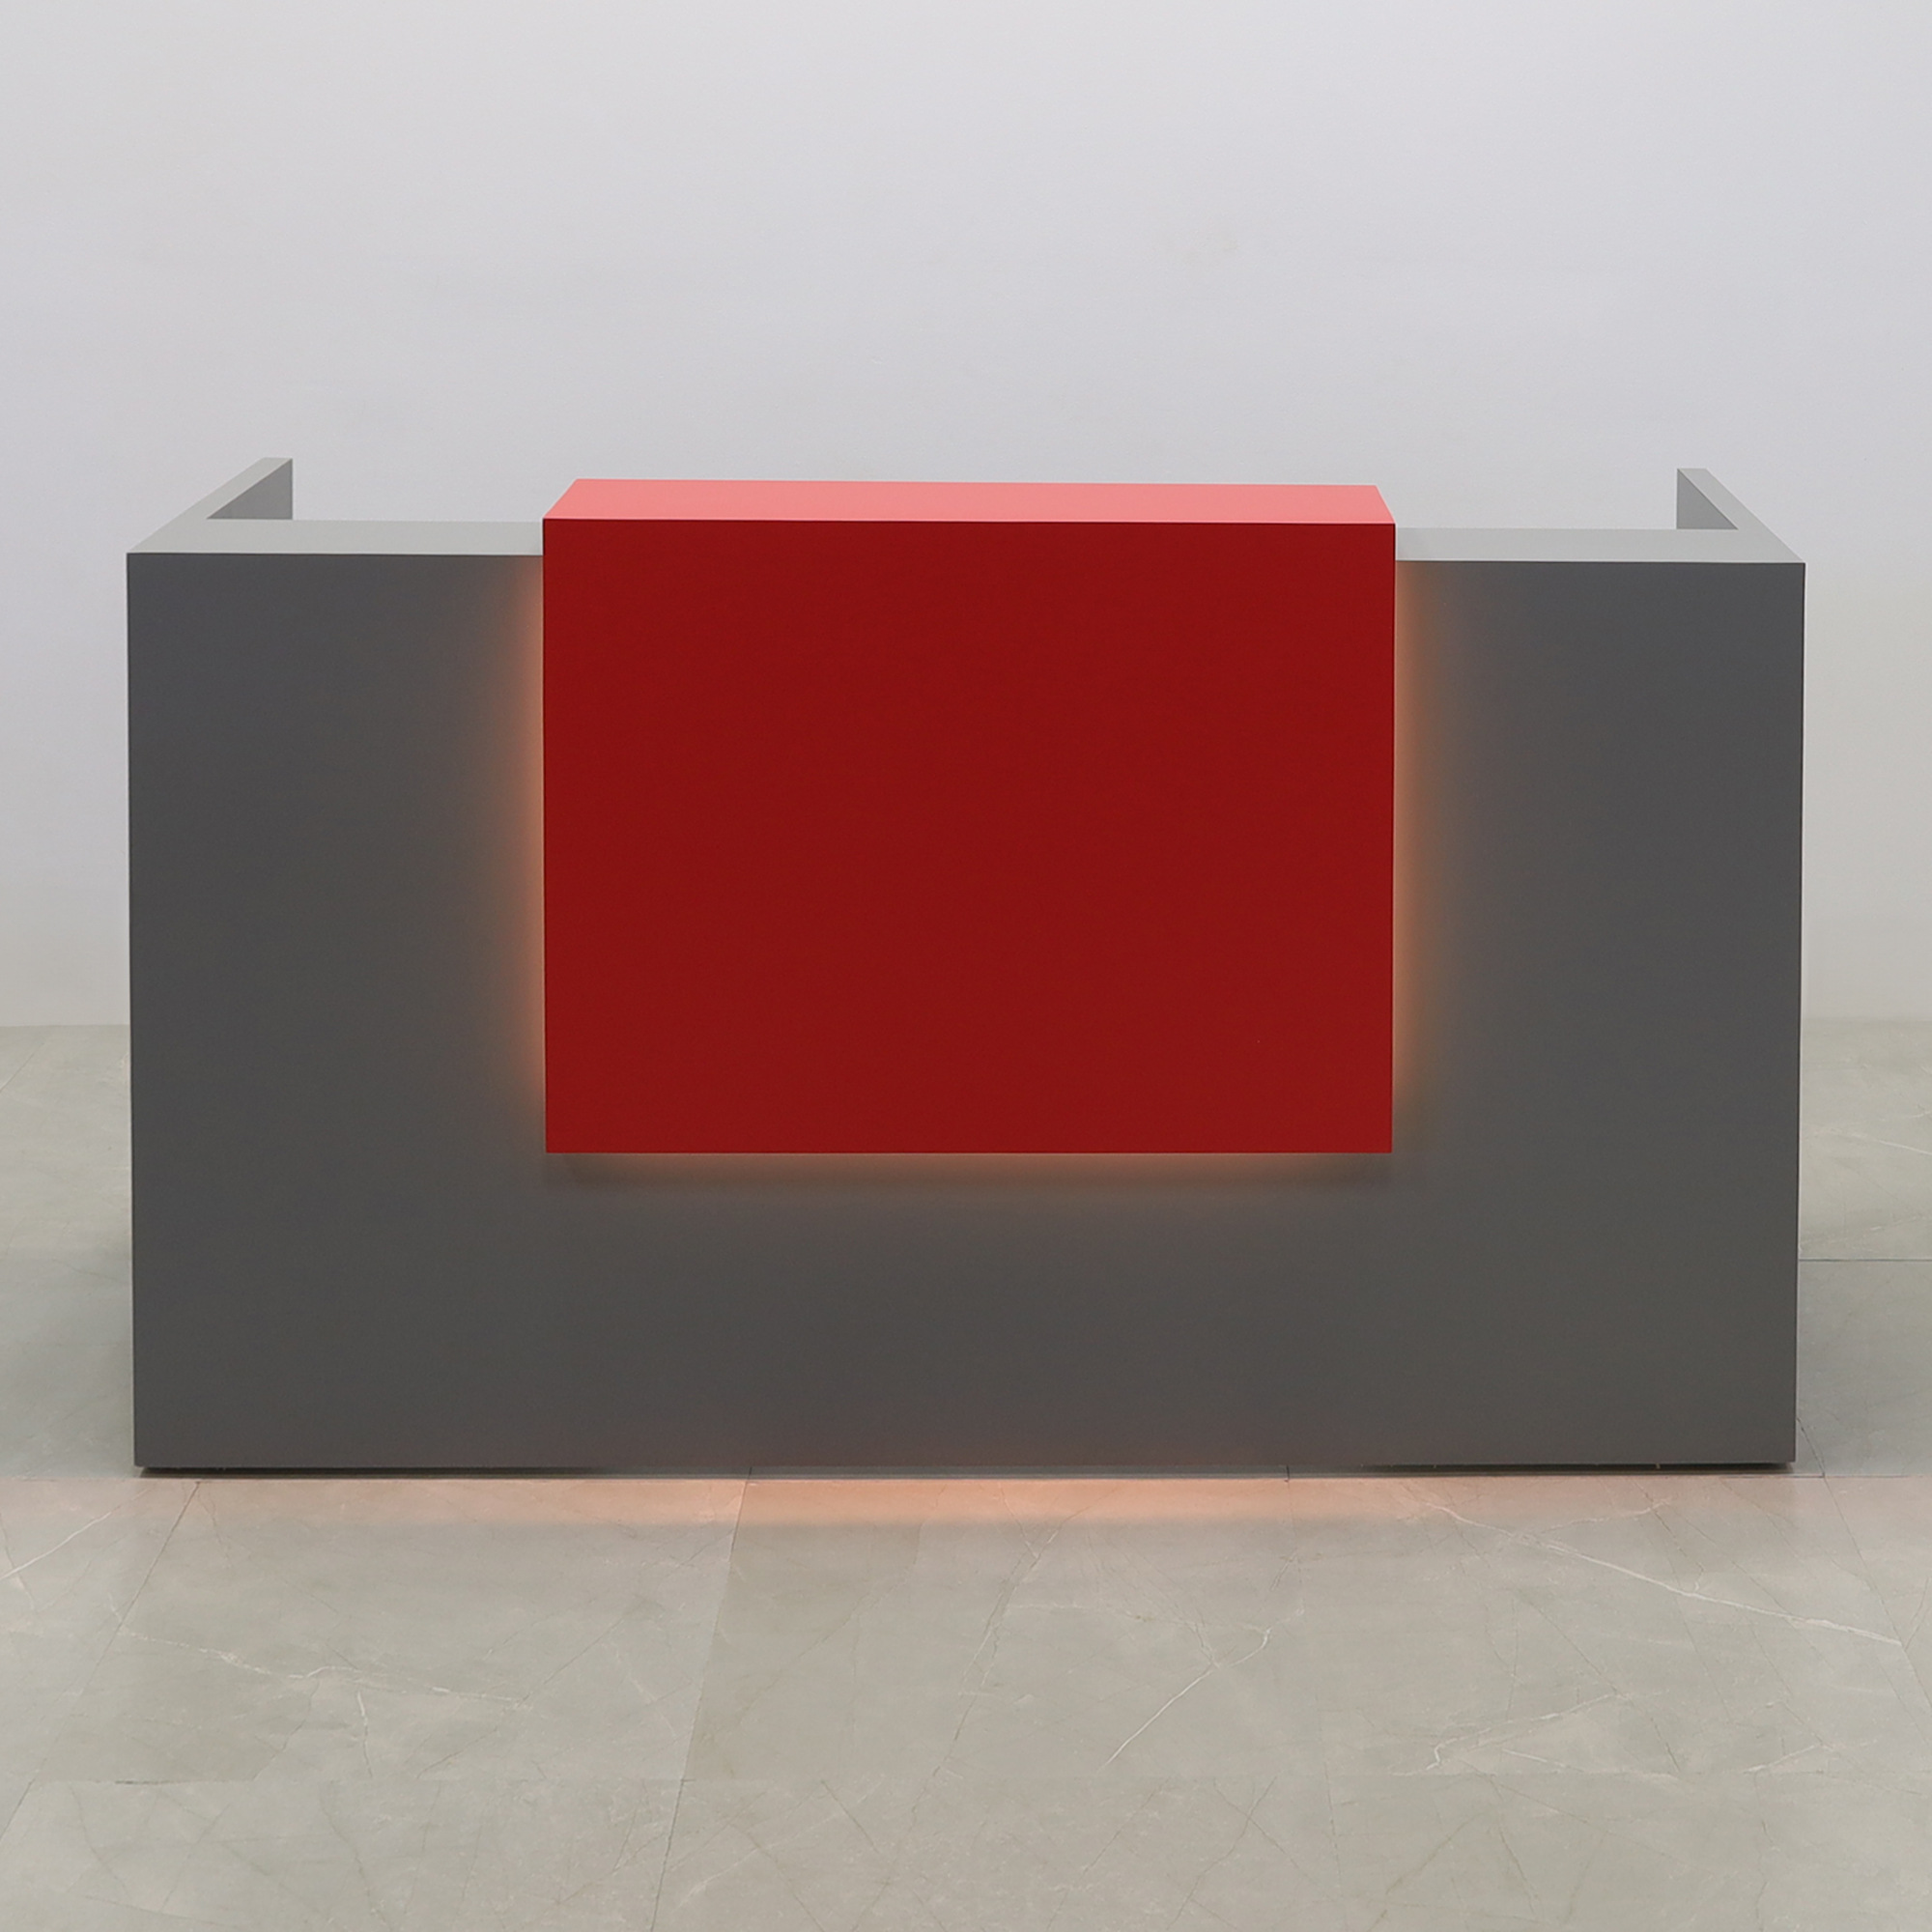 72-inch Chicago Custom Reception Desk in classic red matte laminate counter and storm gray matte laminate, with color LED, shown here.